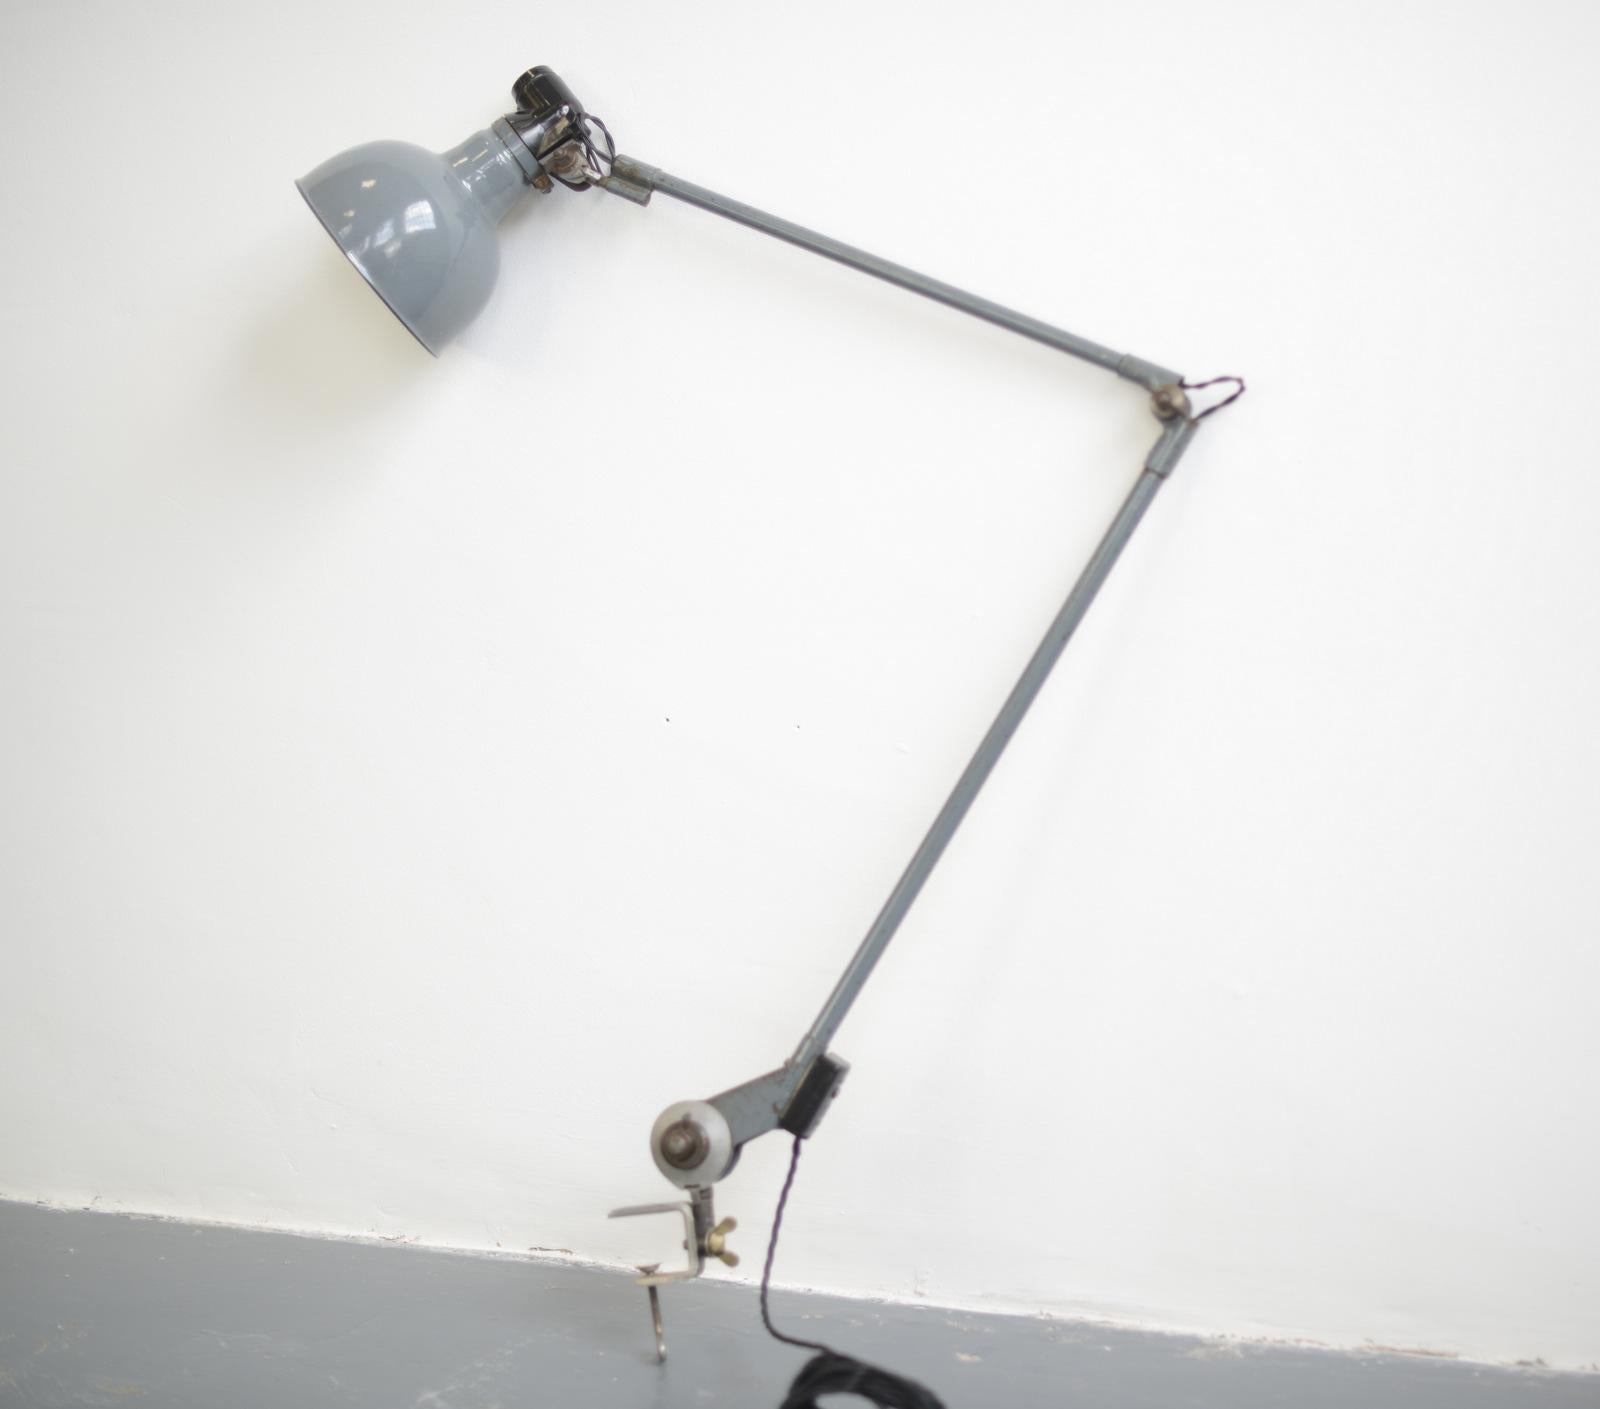 Clamp on task lamp by Ernst Rademacher, circa 1930s

- Vitreous dark grey enamel shade
- Bakelite switch
- Articulated arms
- By Ernst Rademacher
- German, 1930s
- Extends up to 120cm tall
- Shade measures 15cm wide

Condition